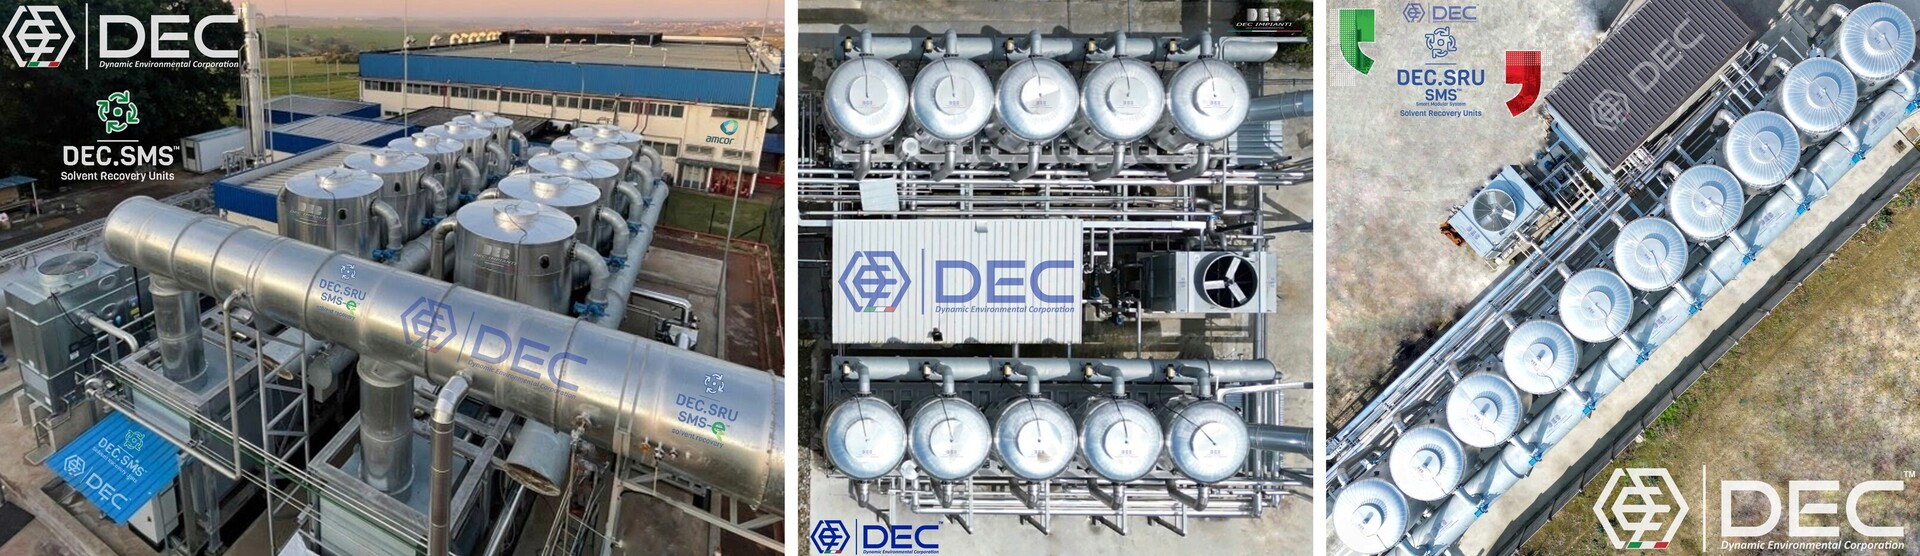 DEC, DEC IMPIANTI, DEC HOLDING, DEC SERVICE, DEC ENGINEERING, DEC AUTOMATION, DEC LAB, DEC ANALYTICS, SRU, SRS, SRP, Solvent Recovery Unit, Solvent Recovery System, Solvent Recovery Plant, SMS, Smart Modular System, CBS, Custom Built System, DEC.ULE, ULE, Ultra Low emission, Ultra Low VOC emission, solvent recovery, VOC emission control, solvent recovery, VOC recovery, VOC abatement, VOC emission control technology, VOC abatement systems, air pollution control, solvent recovery systems, environmental compliance, VOC recovery system, solvent recovery unit, VOC recovery equipment, BAT, Best Available Technique, BREF, IED, Industrial Emissions Directive, solvent recovery equipment, solvent recycling, VOC capture, solvent reclamation, solvent purification, VOC treatment, solvent regeneration, distillation, solvent distillation, VOC recovery process, activated carbon, adsorbent, nitrogen, oxidizer, thermal oxidation, regenerative thermal oxidizer, LEL monitoring, solvent recovery for flexible packaging, flexible packaging, converting, engineering, supply, turnkey, sustainable, innovation, decarbonization, low carbon emissions, green deal, carbon reduction, low carbon, carbon neutrality, net-zero emissions, greenhouse gas mitigation, carbon footprint, carbon capture and storage (CCS), GHG, CO2, energy efficiency, chemical recycling, recycling, sustainability solutions, sustainability, reclaiming, carbon offset, circular economy, climate change, climate policy, climate action, environmental challenges, sustainable development, sustainability roadmap, ESG, TBL